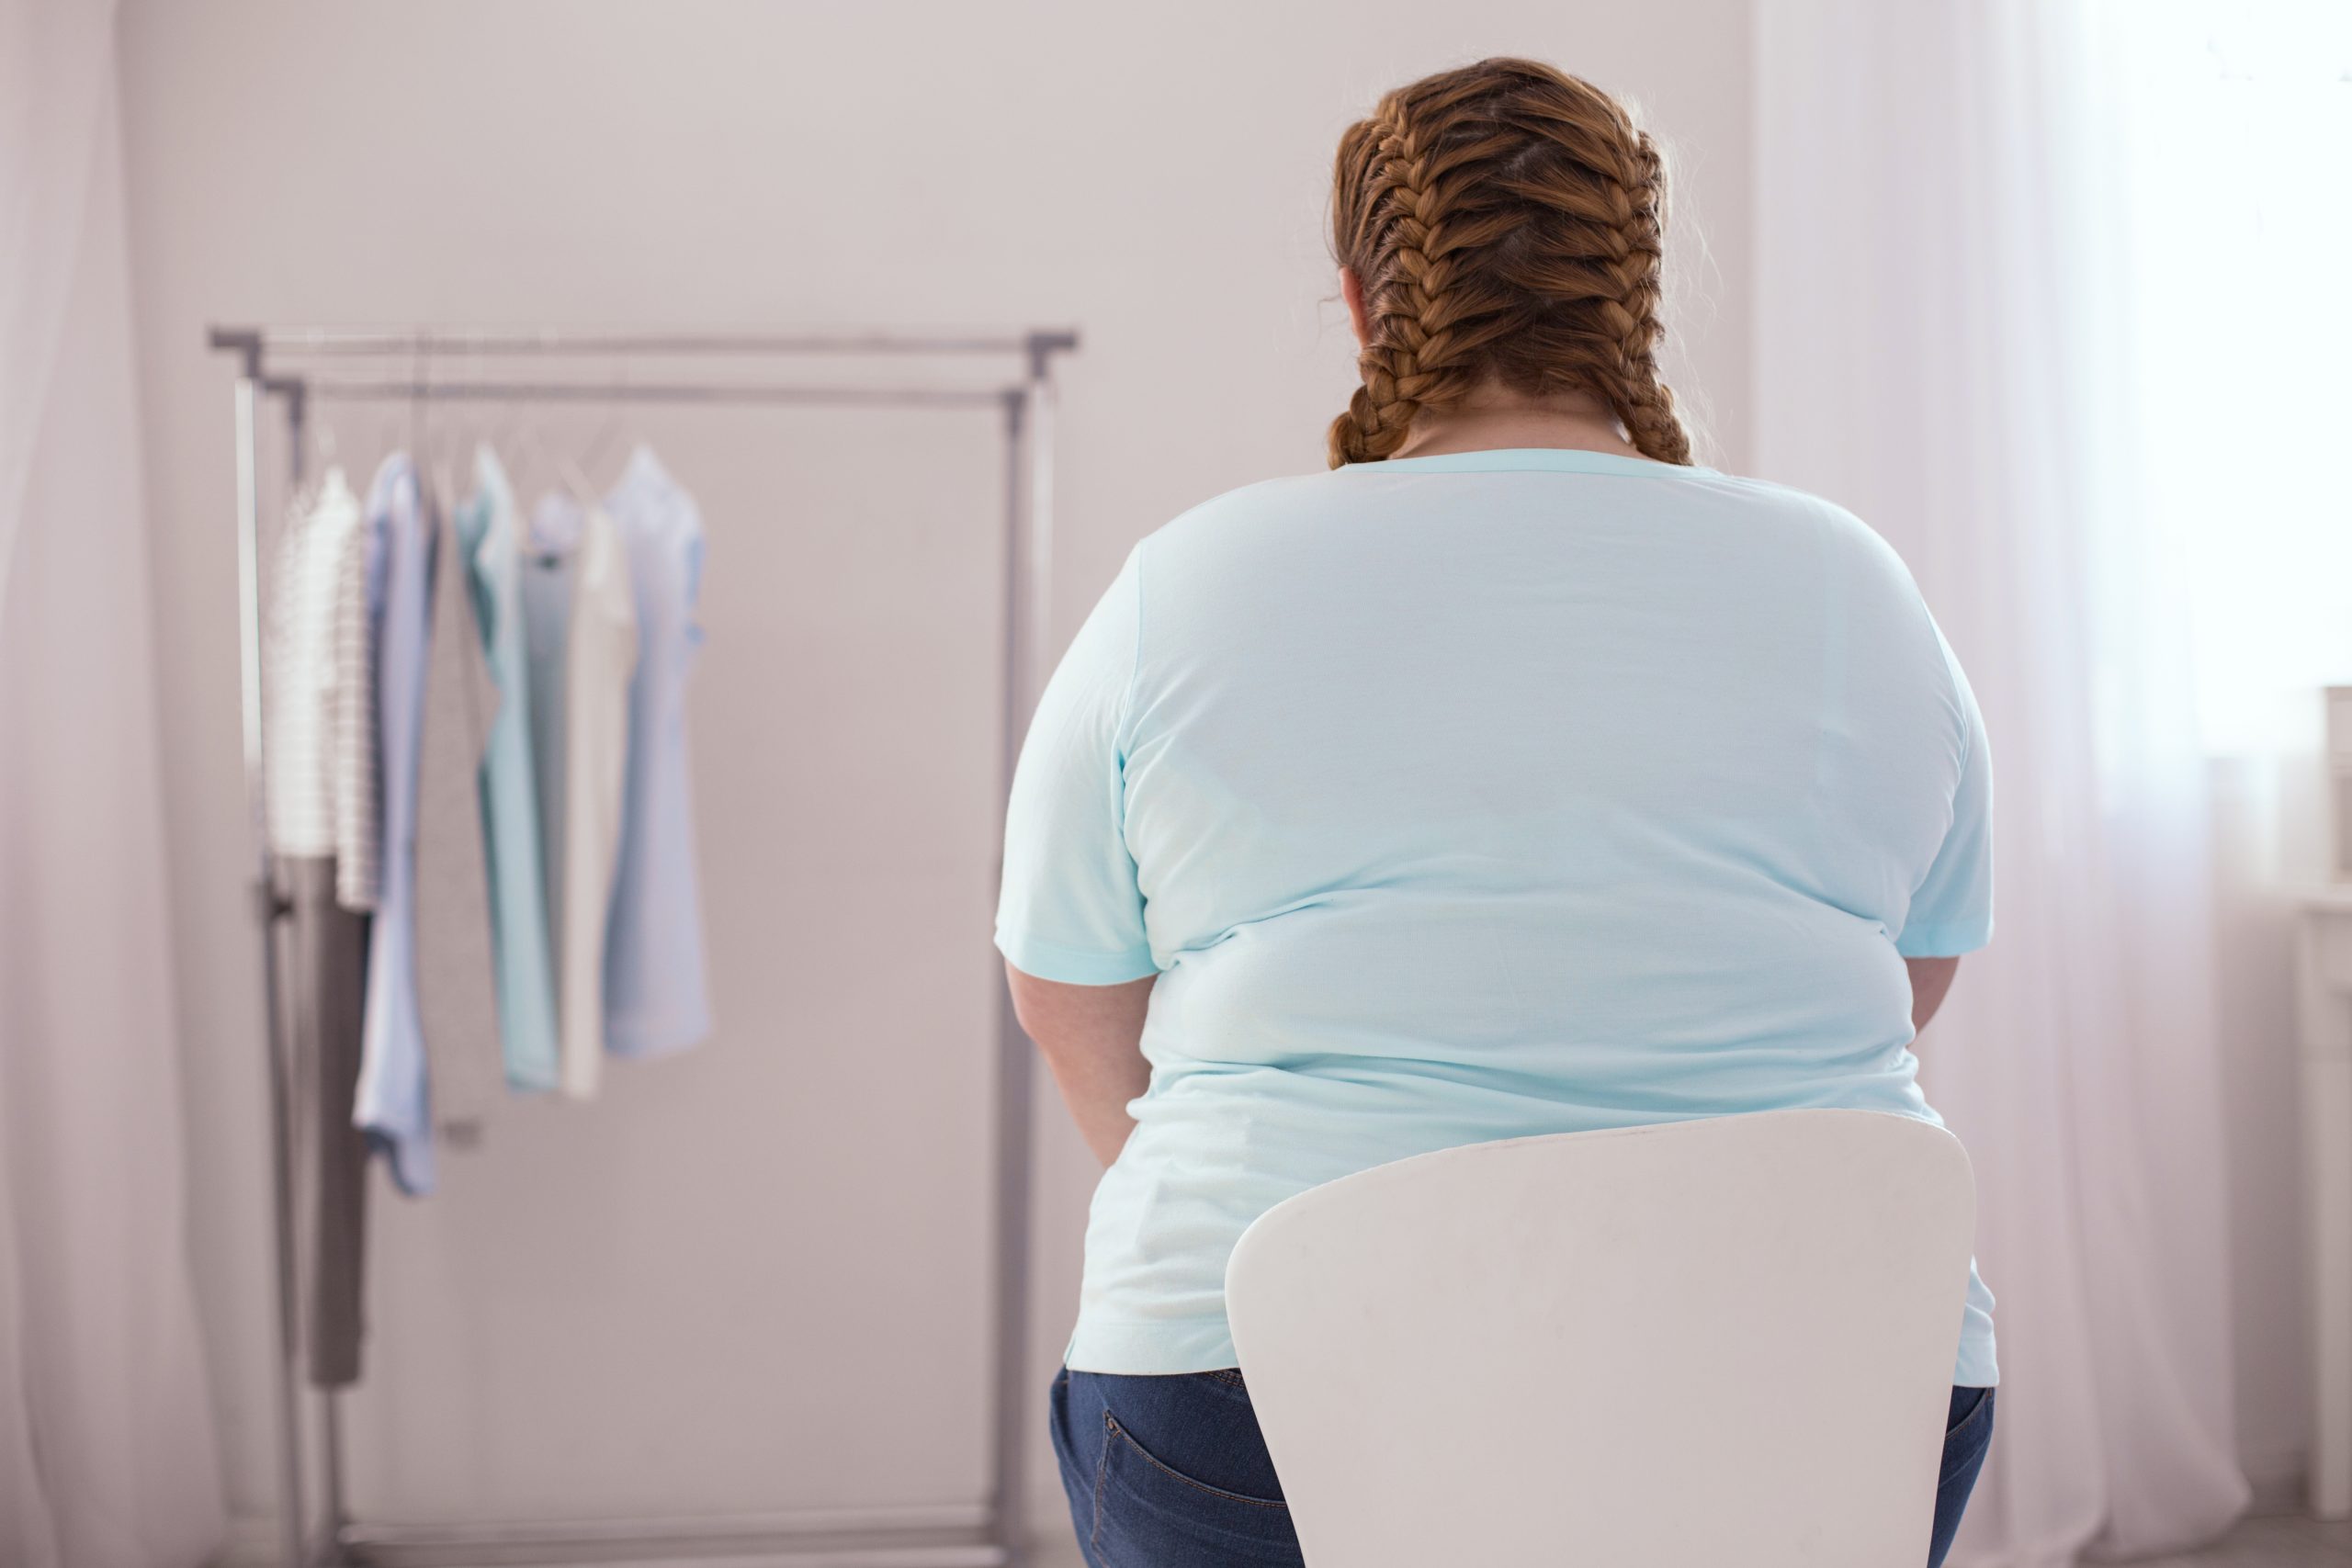 Obese woman sitting in a chair, looking at new clothes.